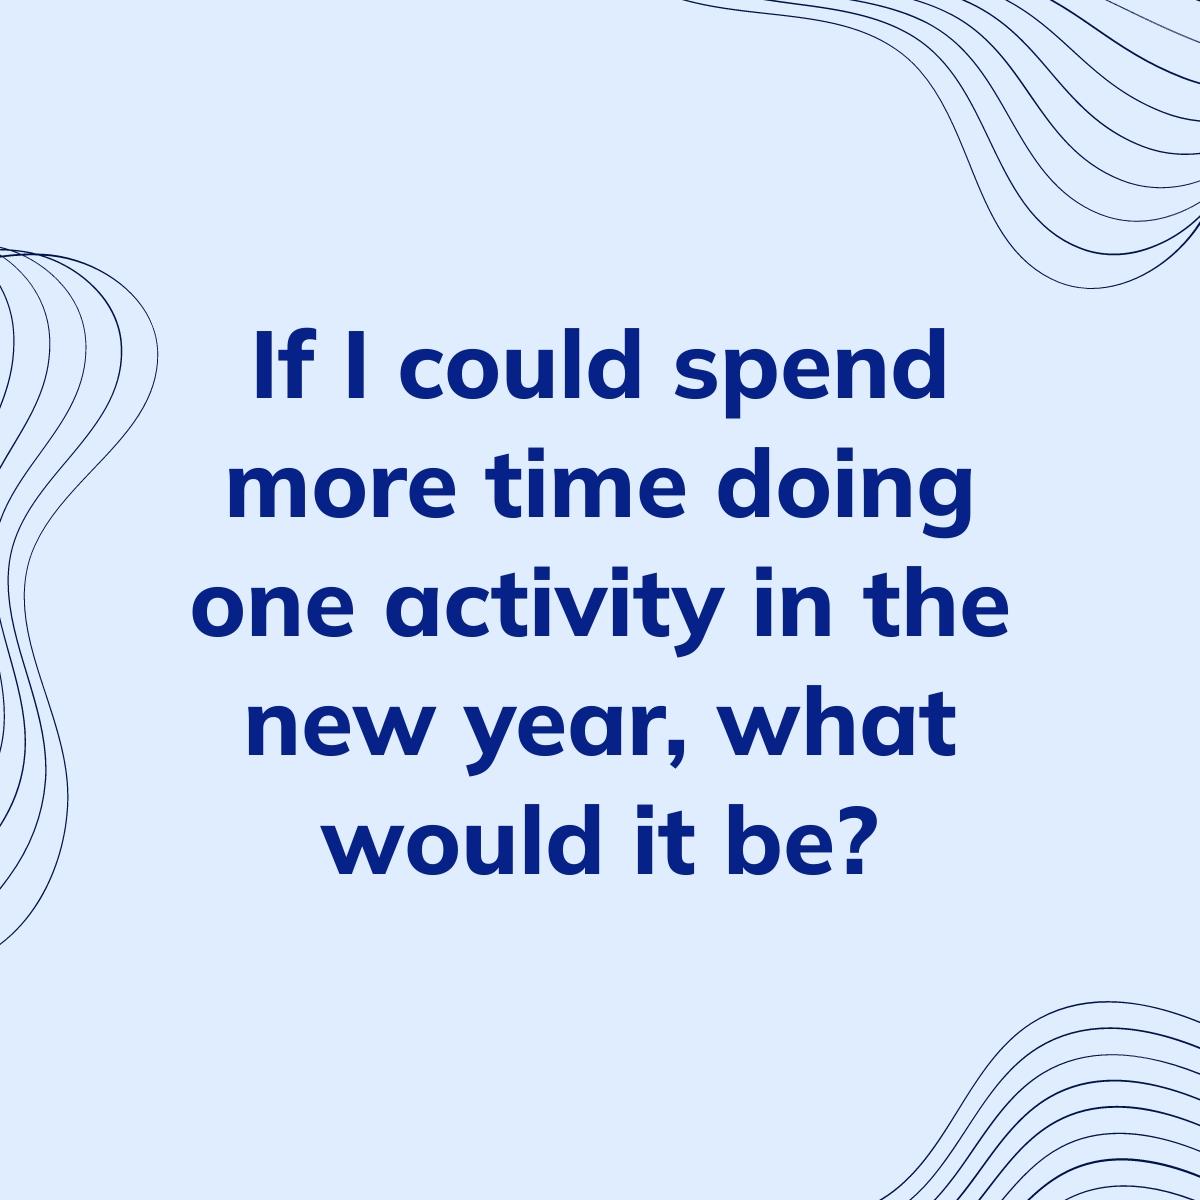 Journal Prompt: If I could spend more time doing one activity in the new year, what would it be?